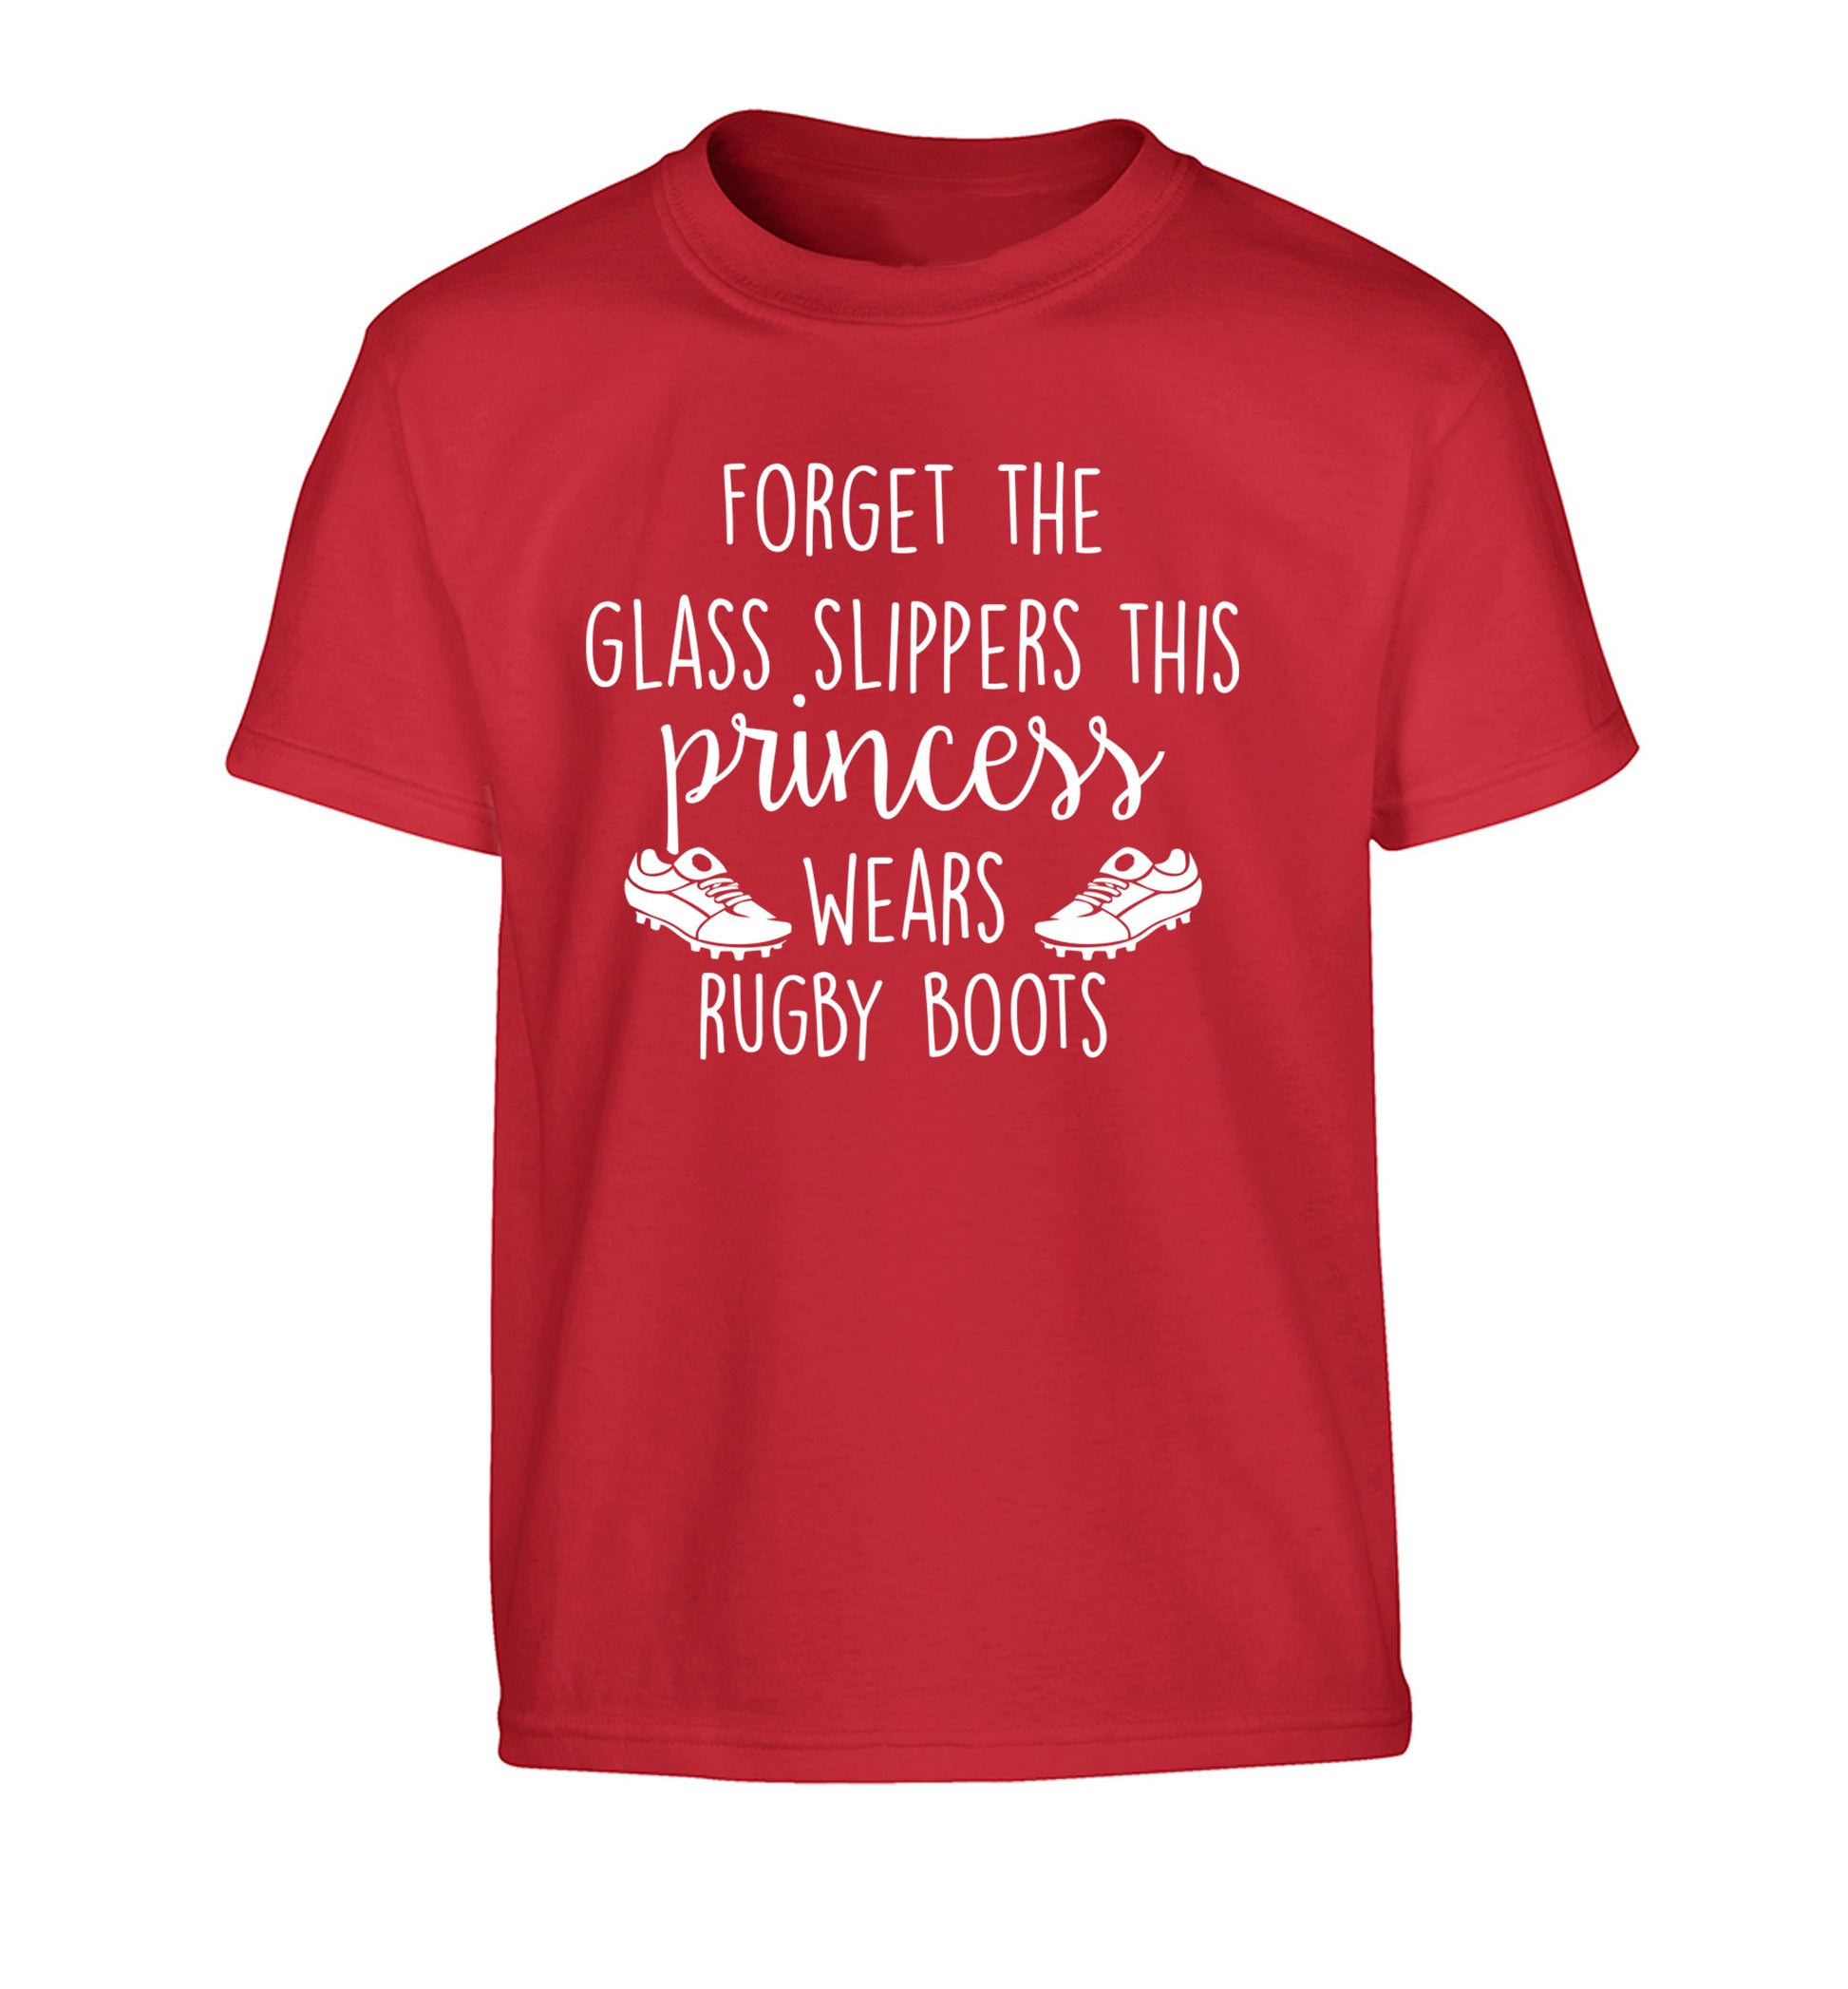 Forget the glass slippers this princess wears rugby boots Children's red Tshirt 12-14 Years